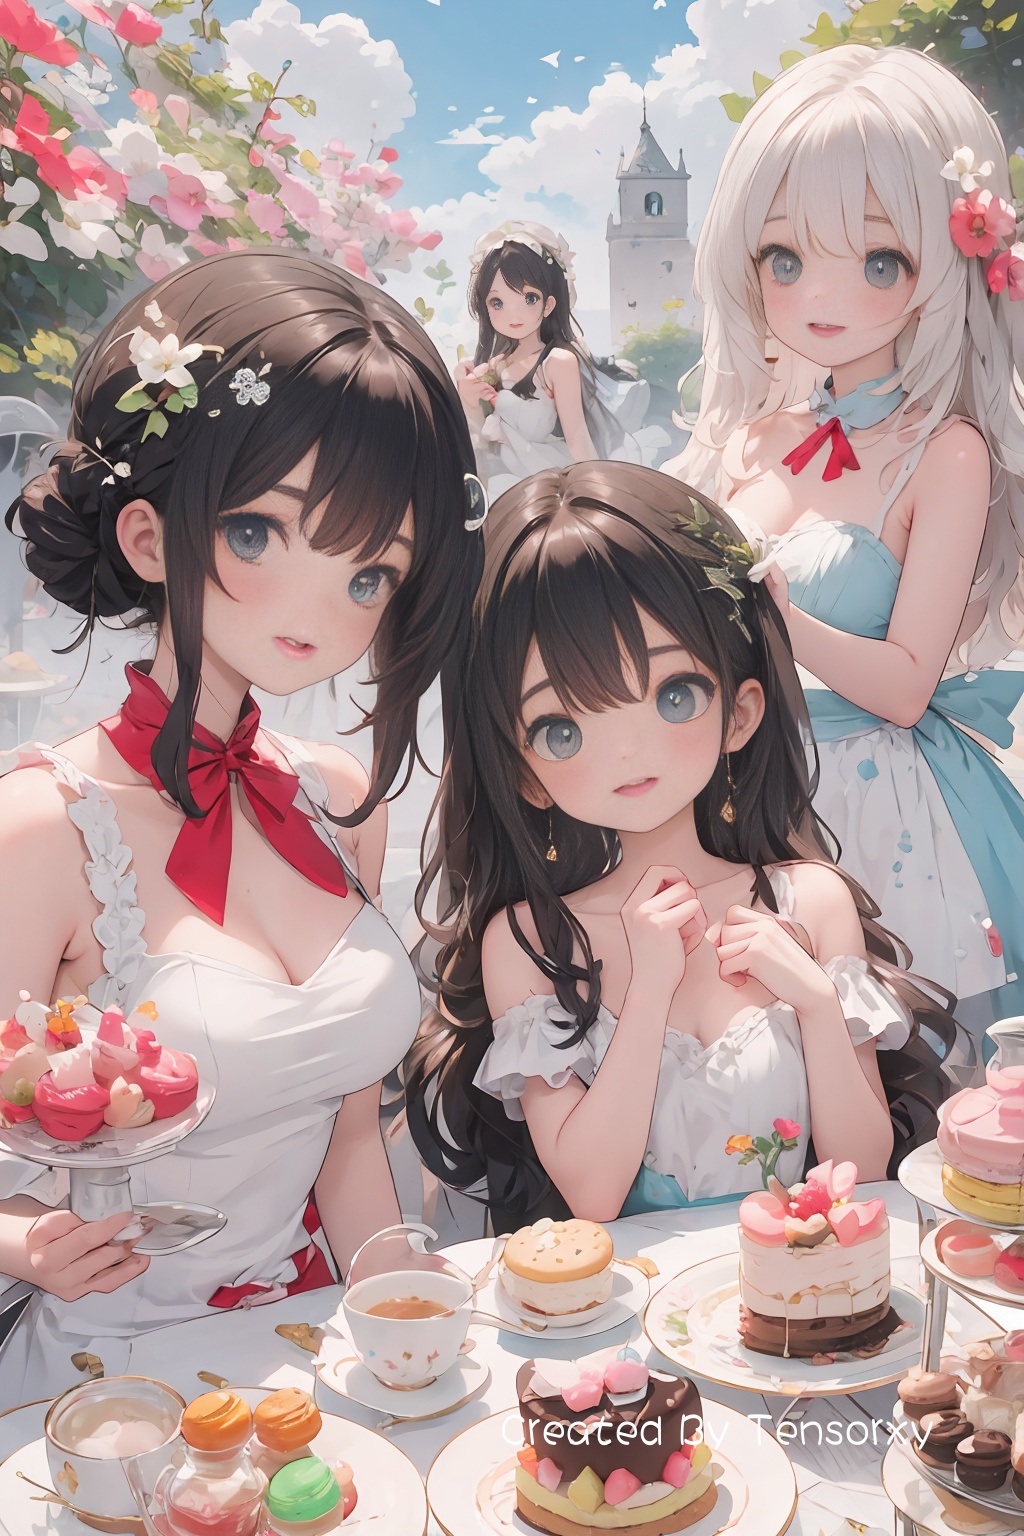 4+ girls,multiple colored hairs,sweet maids,random cute faces,group shot,zoom camera,sweet tea party,lots of cakes,macarons,chocolates,parfaits,cookies,land of sweets,